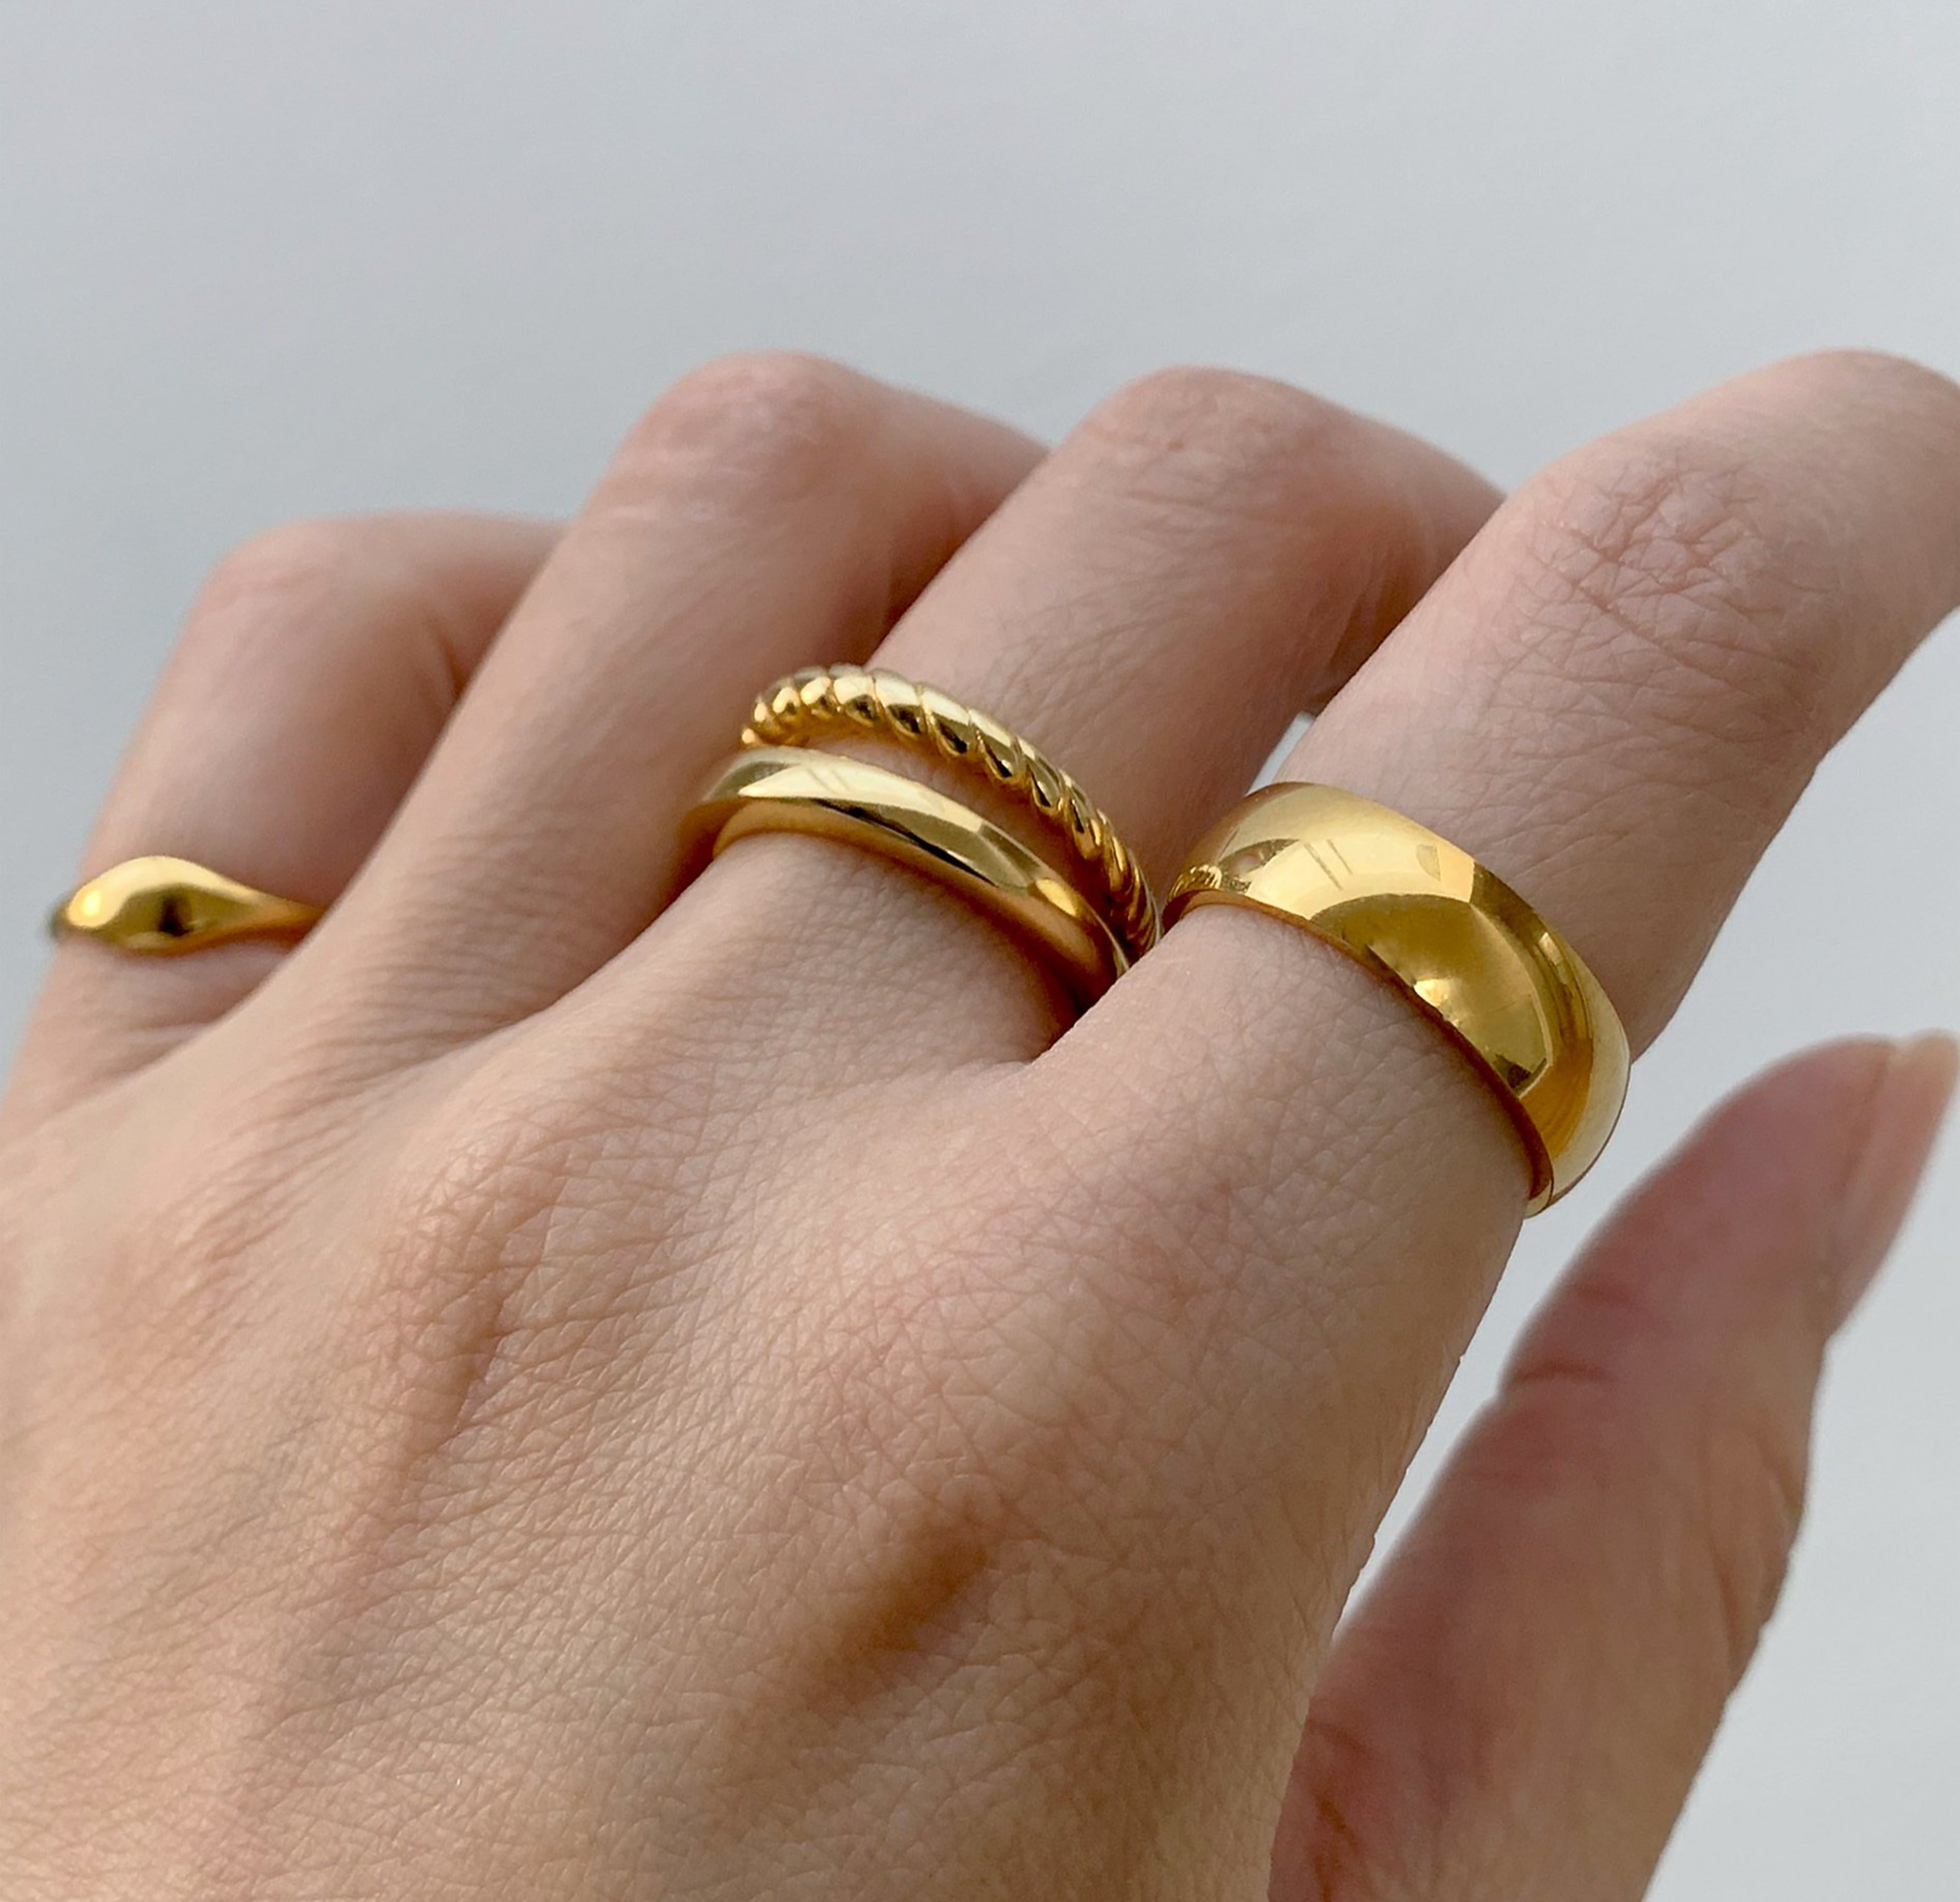 Drew dainty gold signet pinky ring, paired with Birds duo ring and Toni thick gold ring band. Waterproof rings